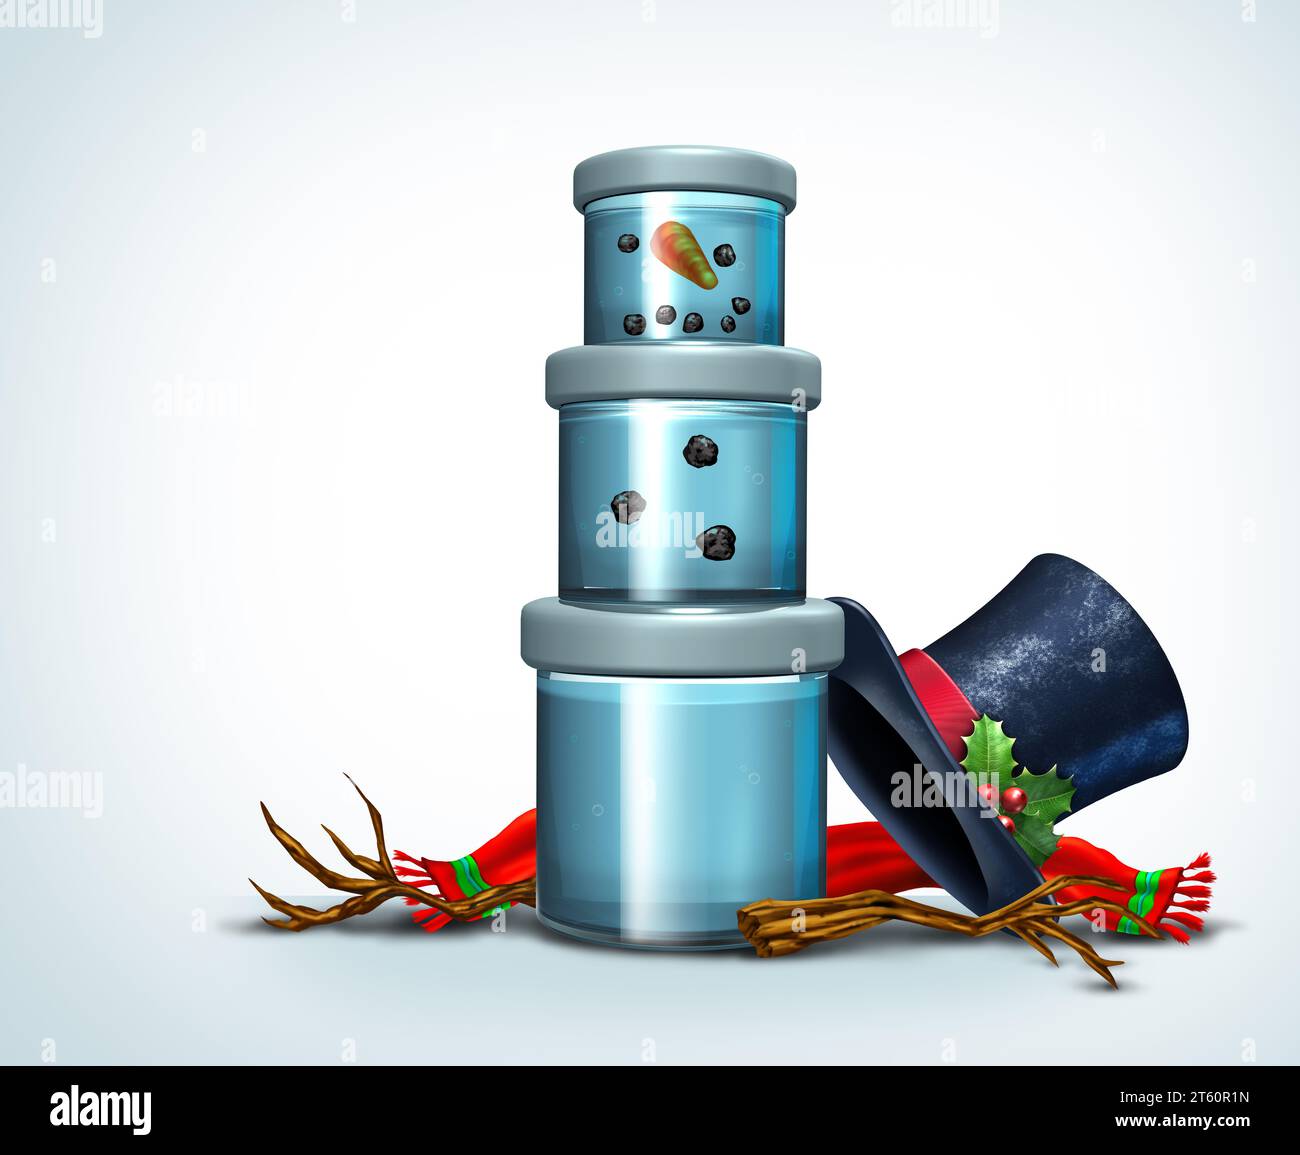 Funny Melted Snowman concept as a snow man melted and stored in a container as fun festive warm winter snowing holiday humor for a seasons greeting Stock Photo